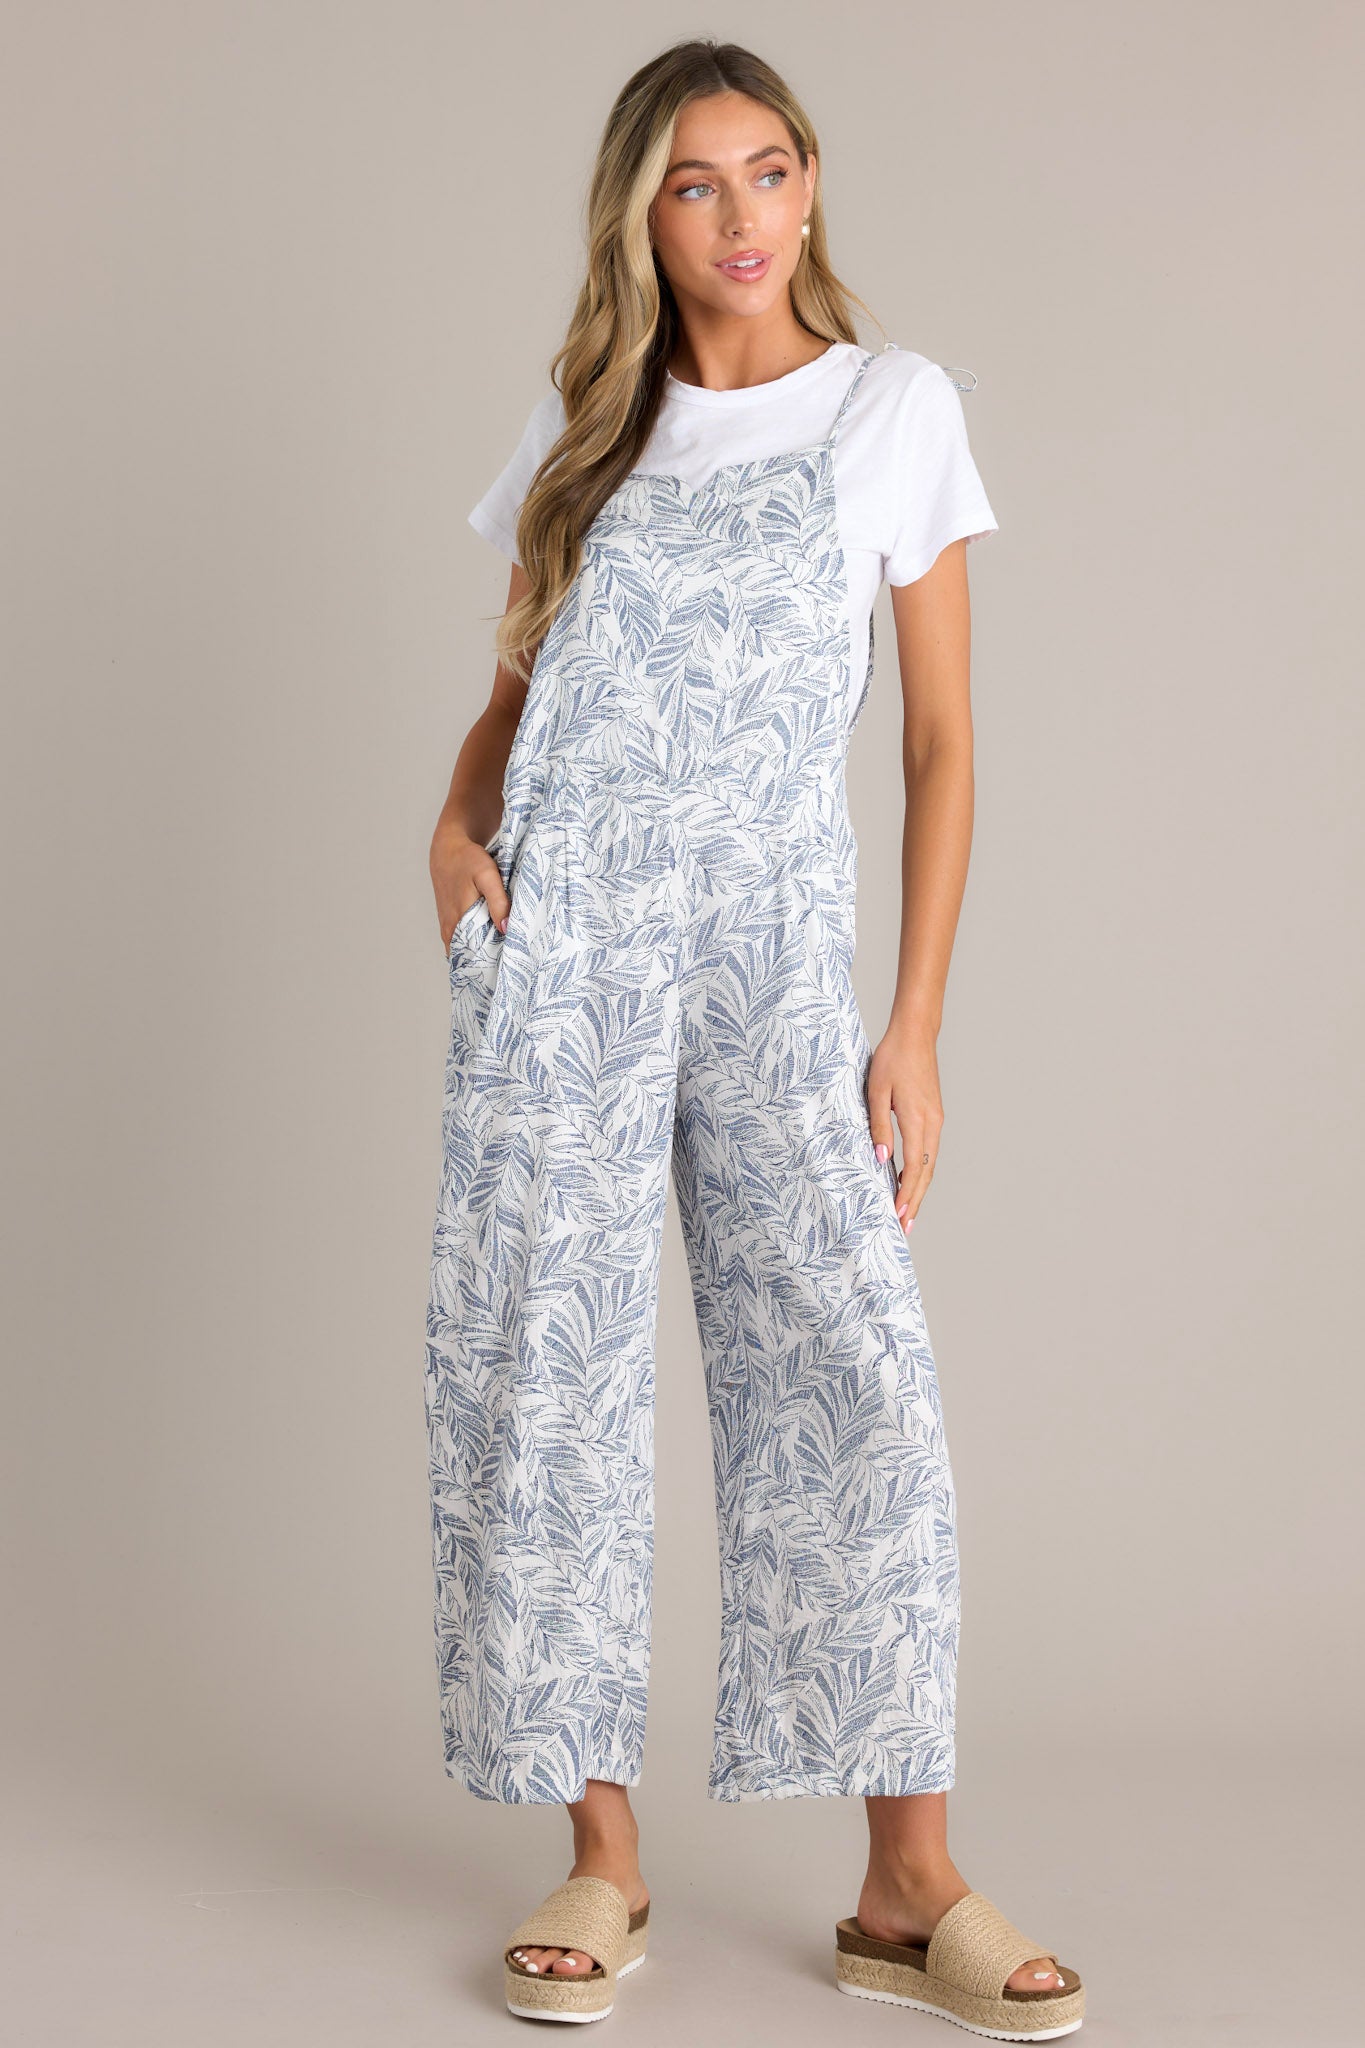 Casual jumpsuit featuring a light blue and white leaf print, wide legs, and adjustable tie straps.